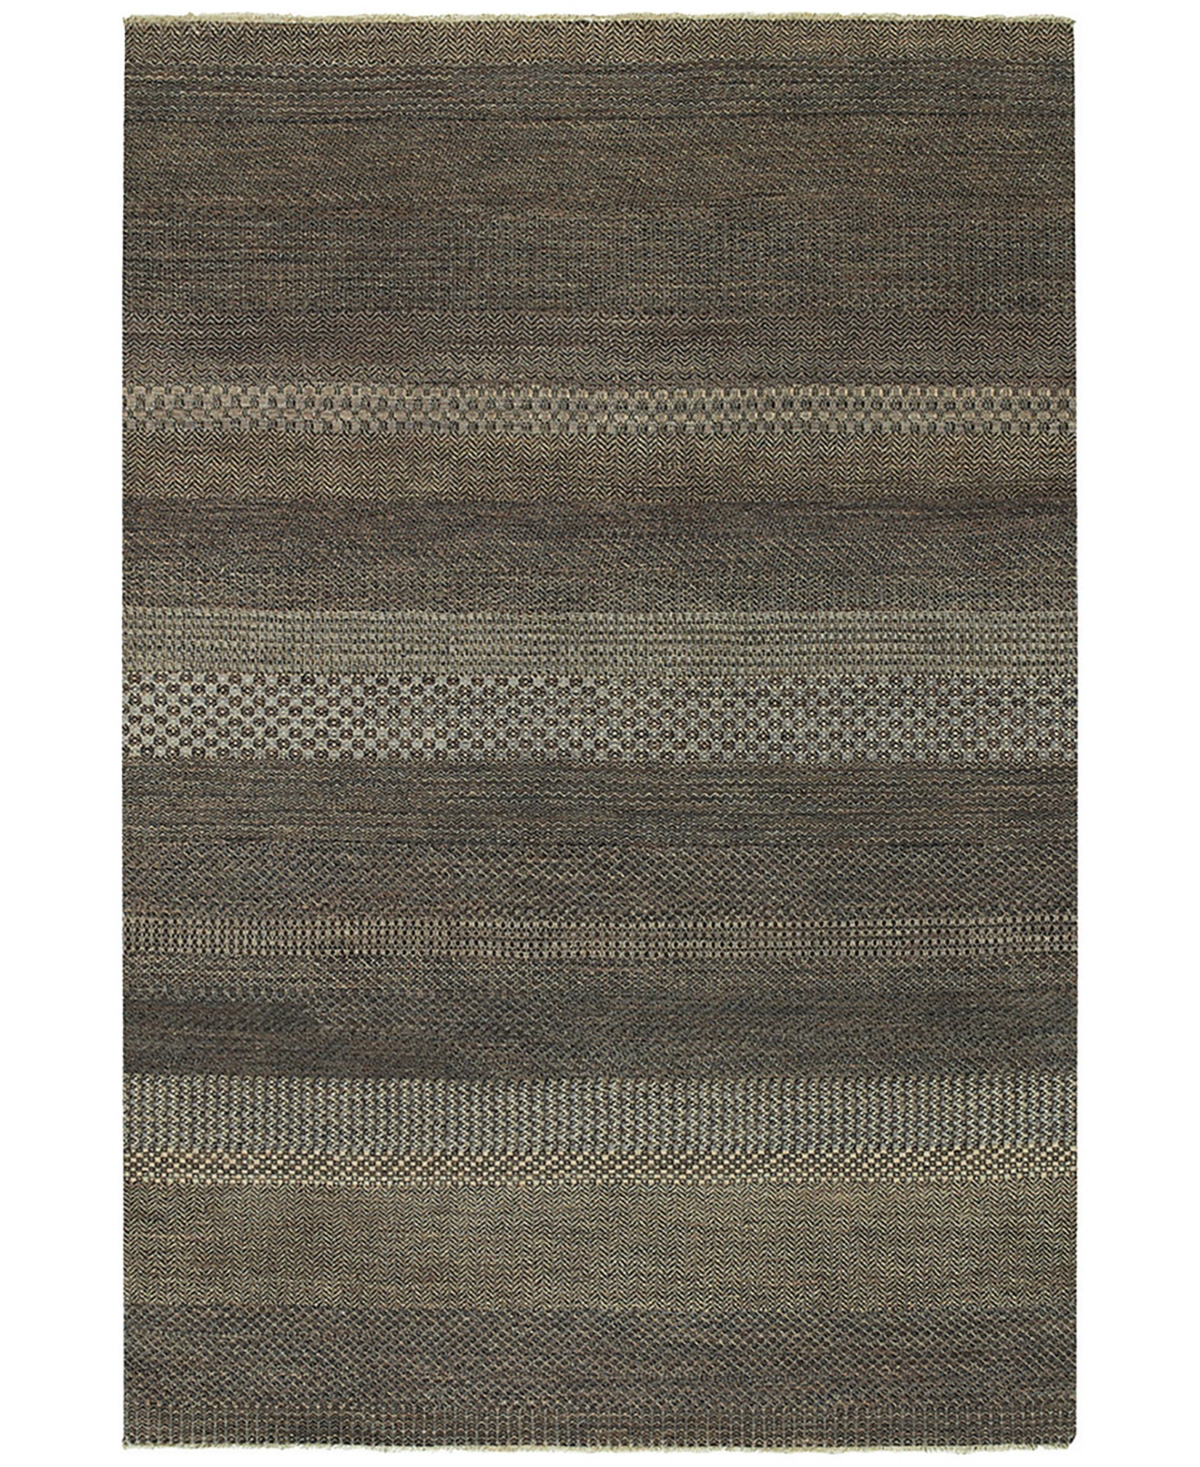 Capel Barrister 775 2' x 3' Area Rug - Brown